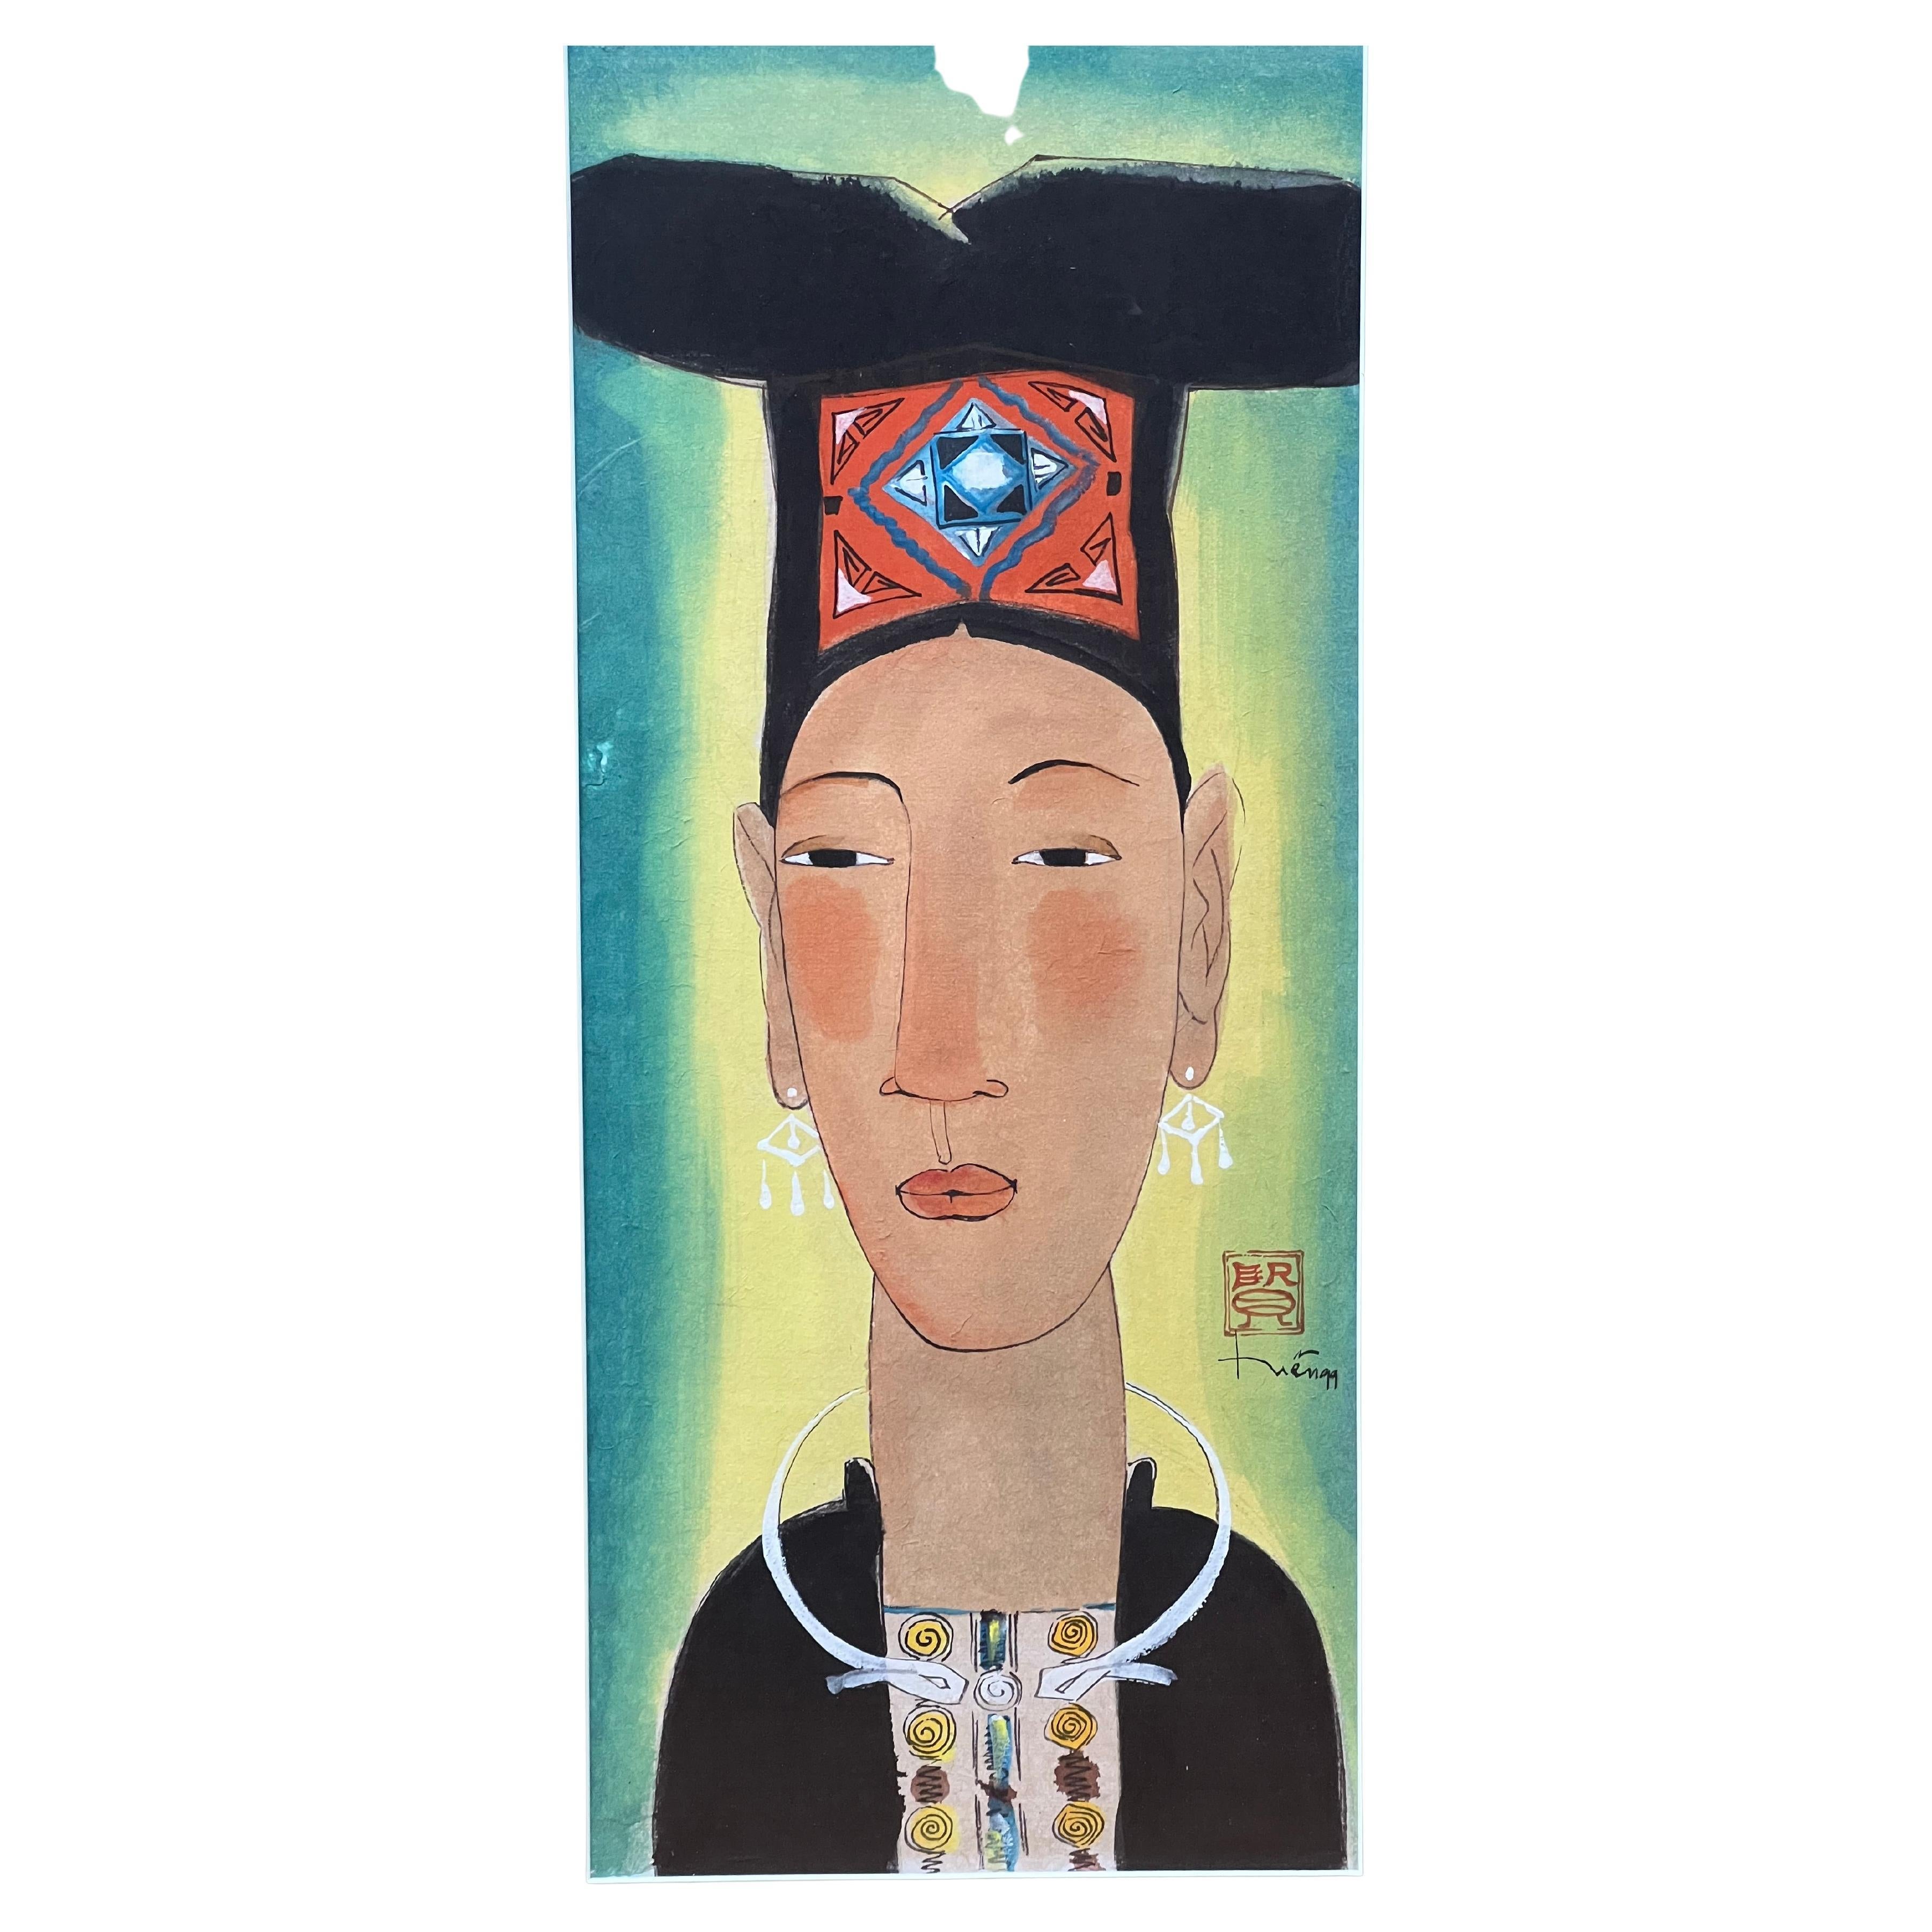 This traditional Asian woman portrait lithograph features a subject wearing a high black hat on a green background. A red and blue rectangular piece of fabric is prominently displayed on the front of the headdress, adding a pop of color to the